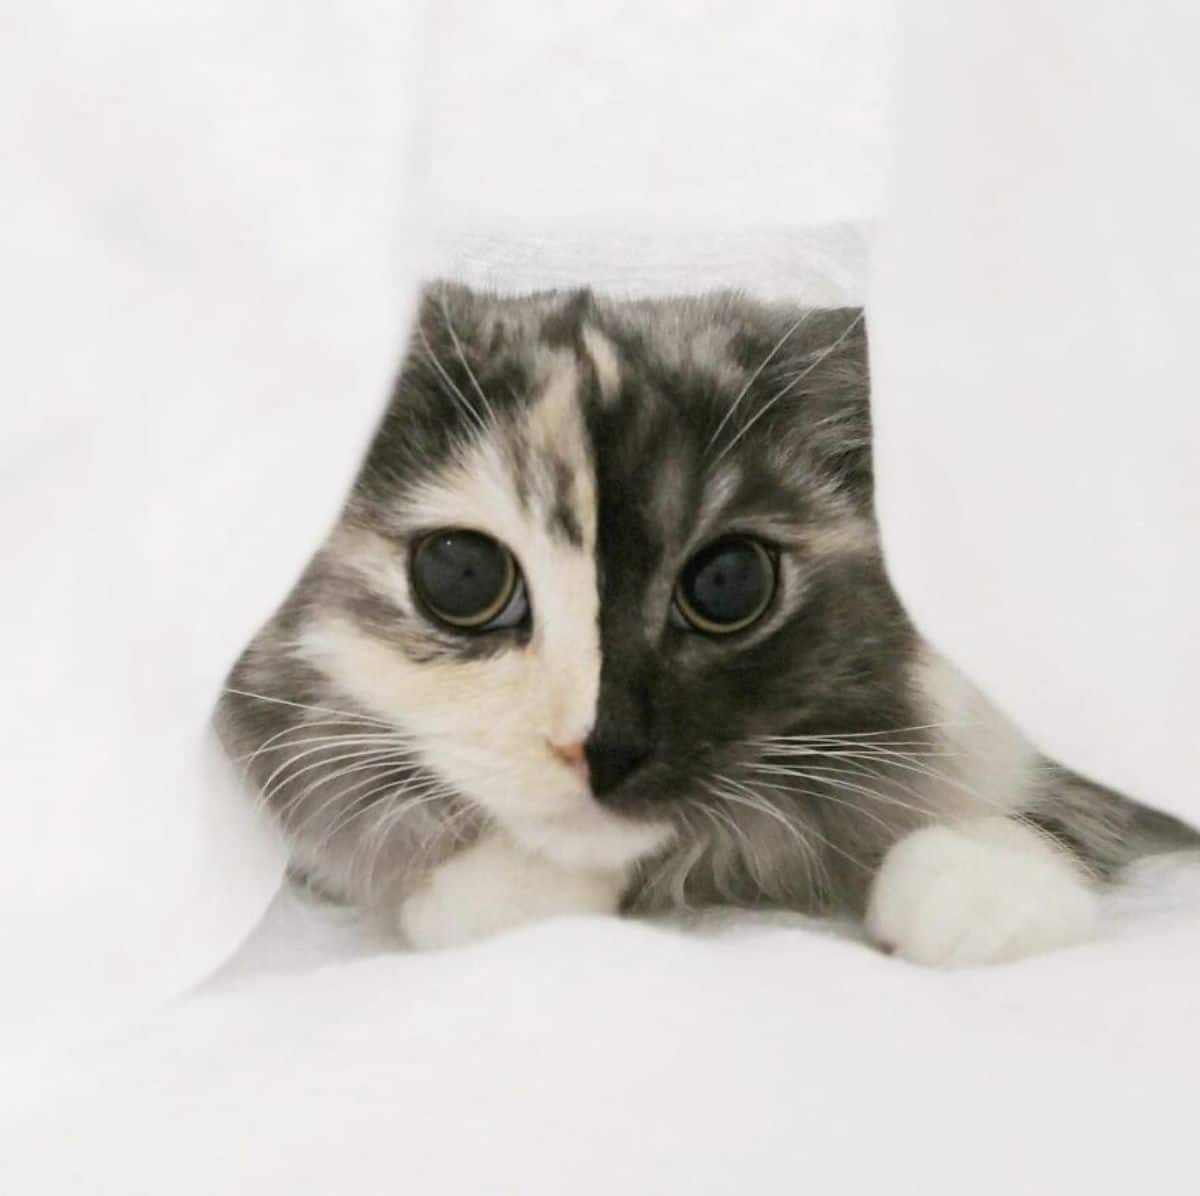 fluffy cat with right side of face being grey and left side being black peeking from under a white blanket